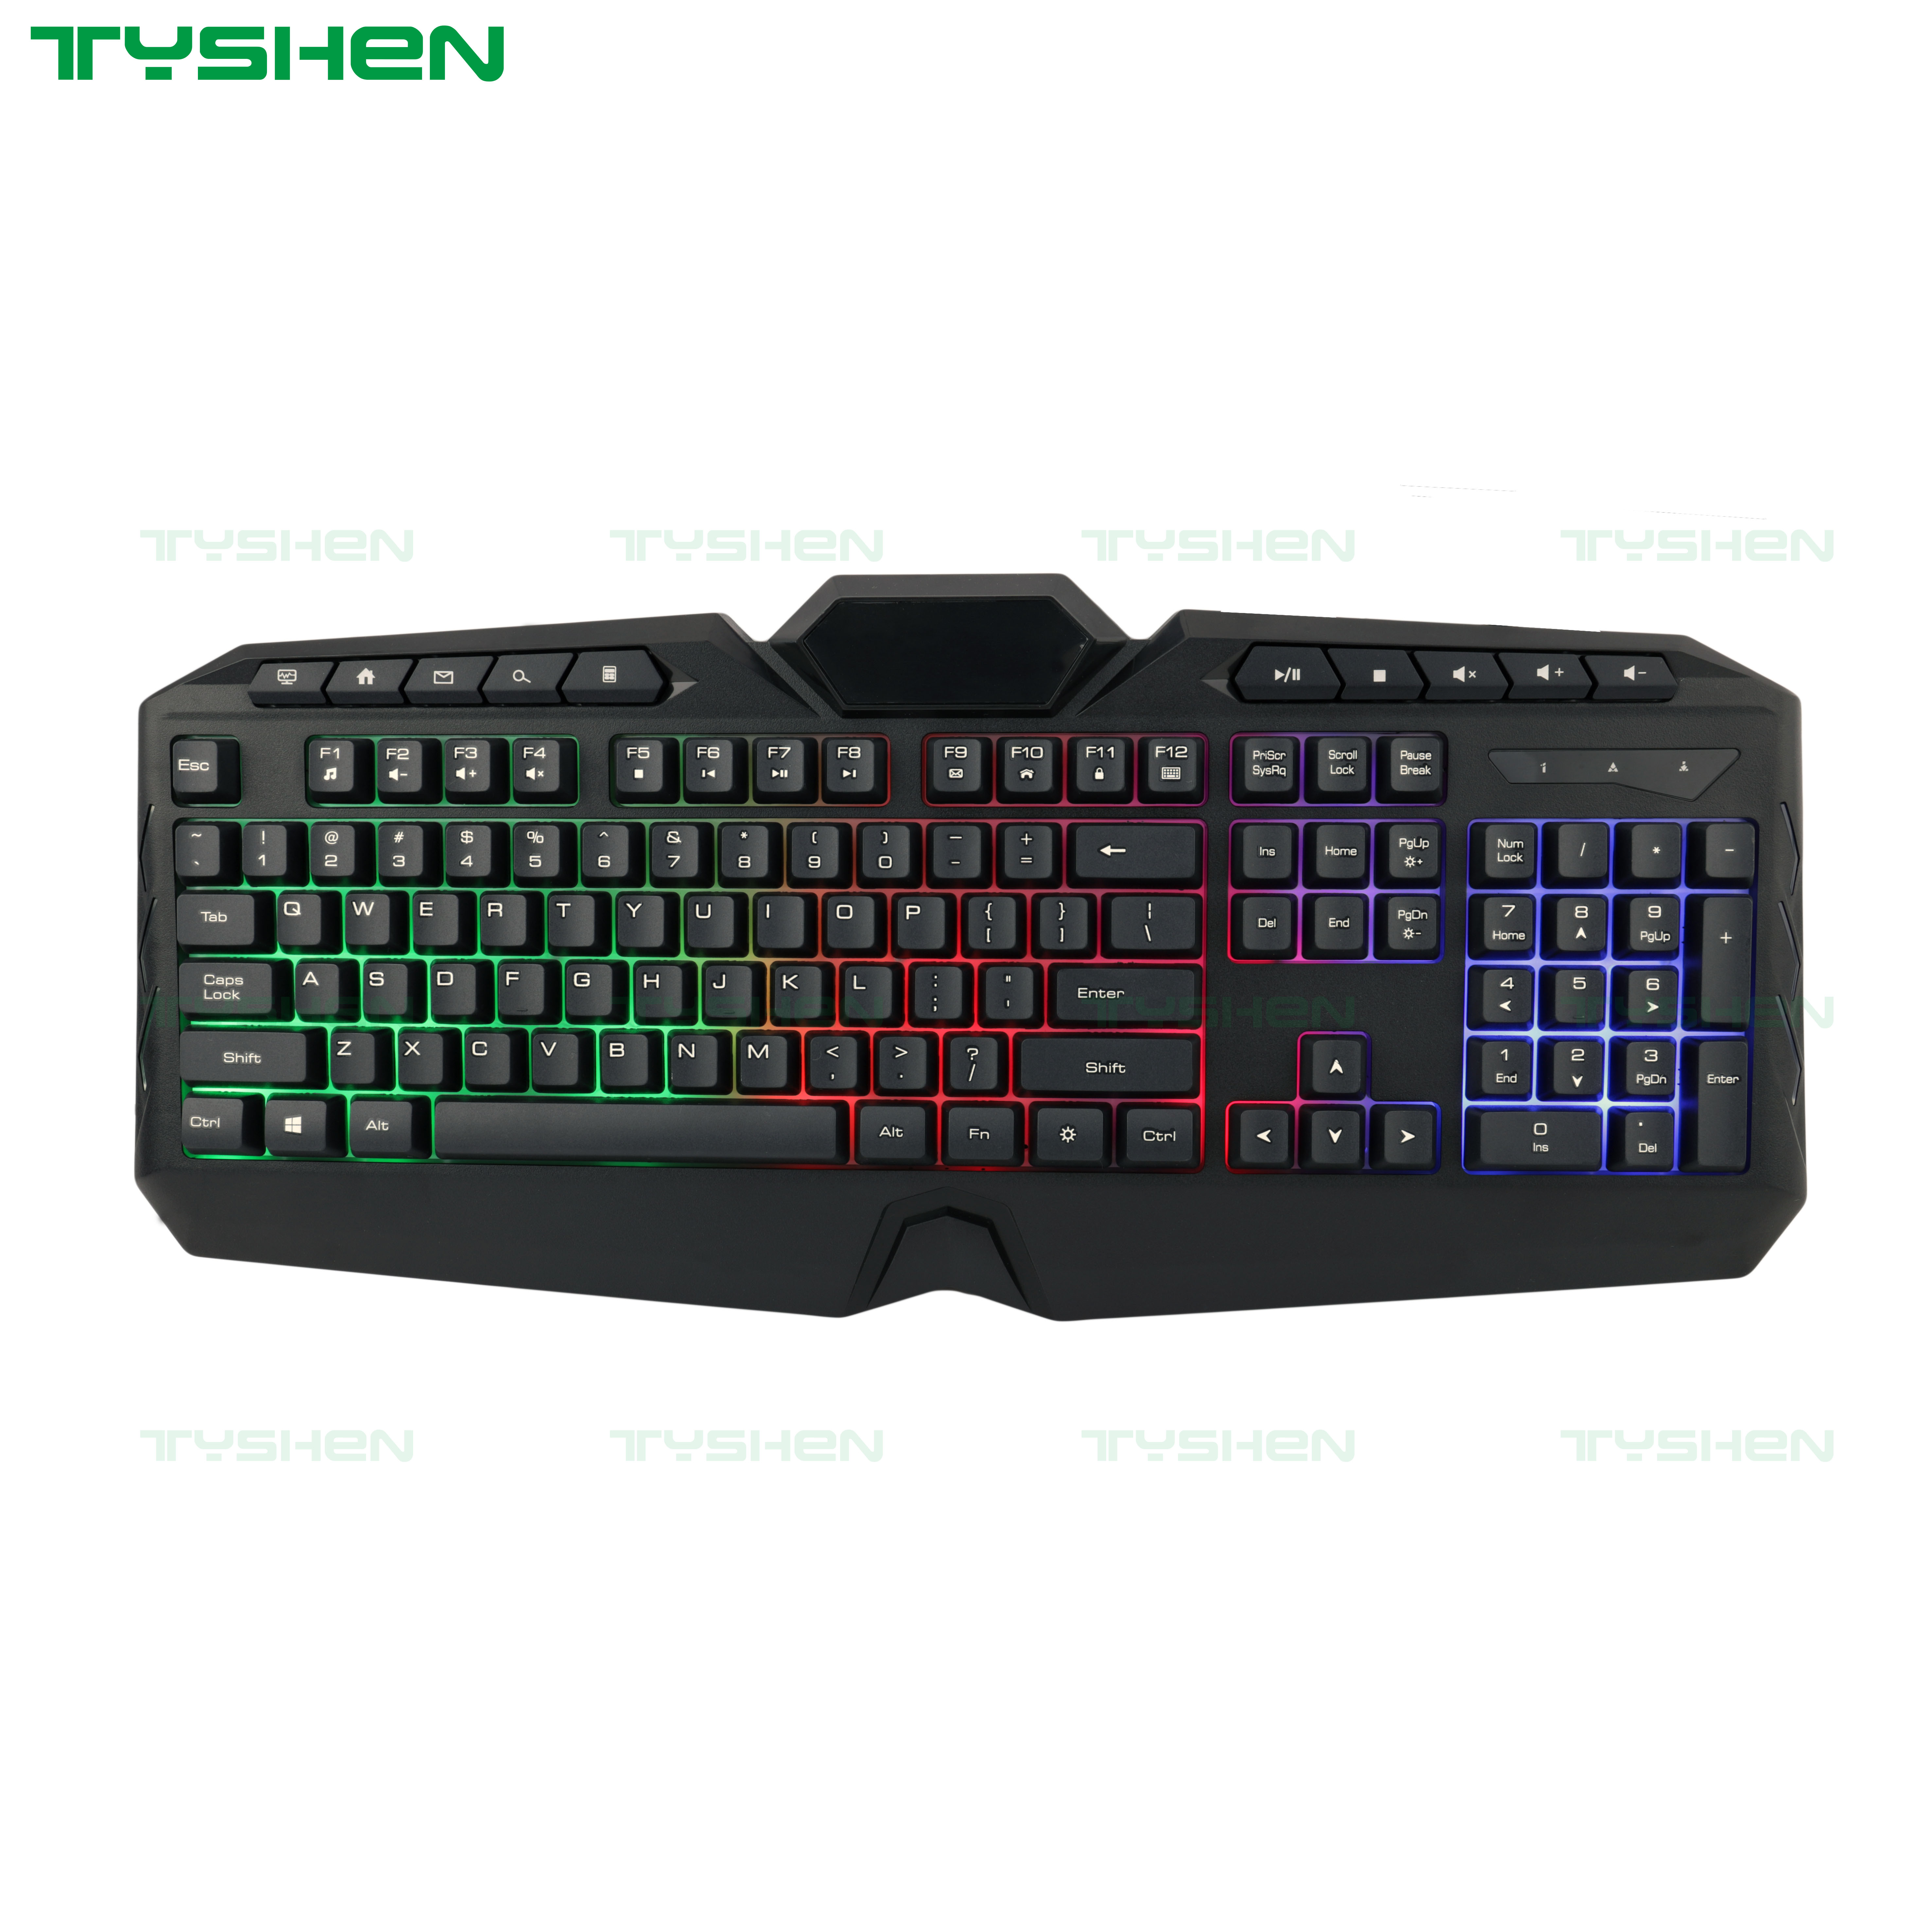 4 in 1 Gaming Combo Set RGB LED Light Full PC Keyboard Mouse Headphone and Mouse Pad All in One Computer Combo Kits